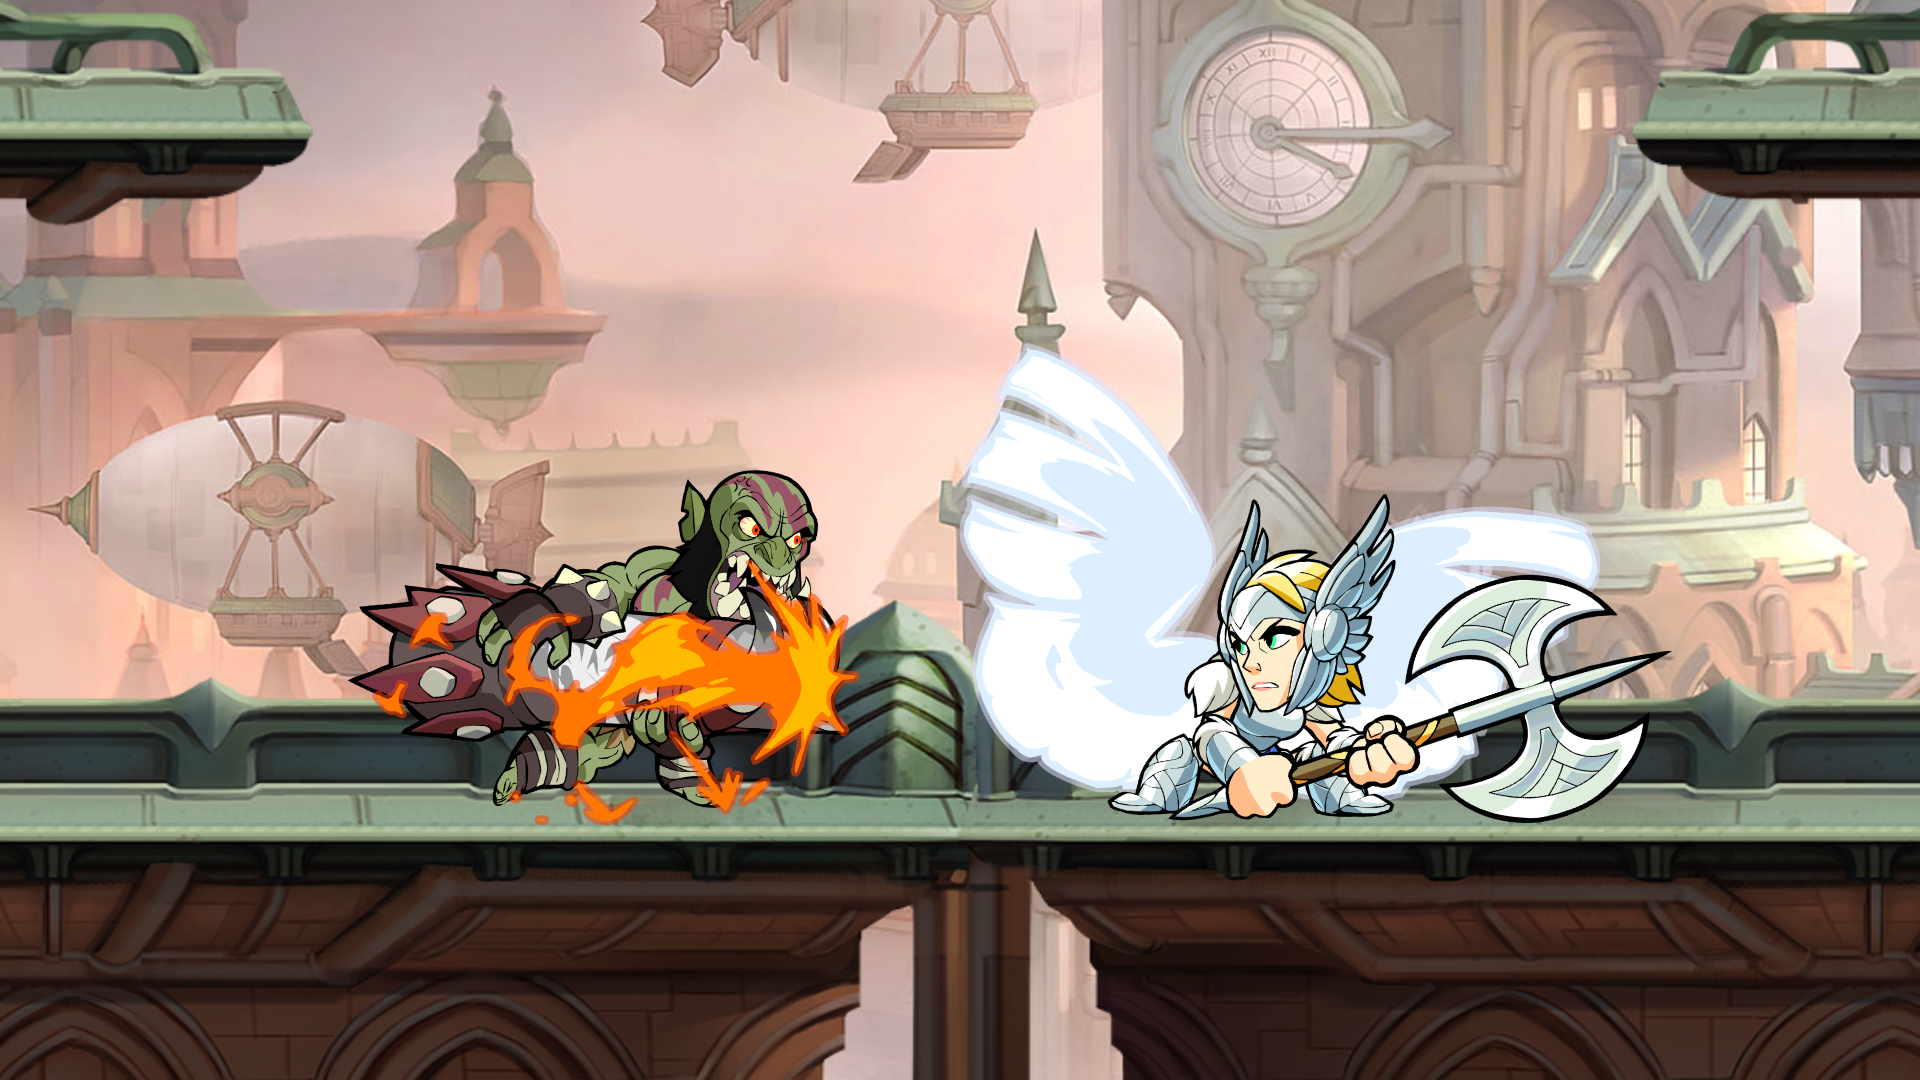 Brawlhalla is a free-to-play 2D Platformer fighting game developed by Blue Mammoth Games and Ubisoft for Nintendo Switch, Xbox Series X|S, Xbox One, P...